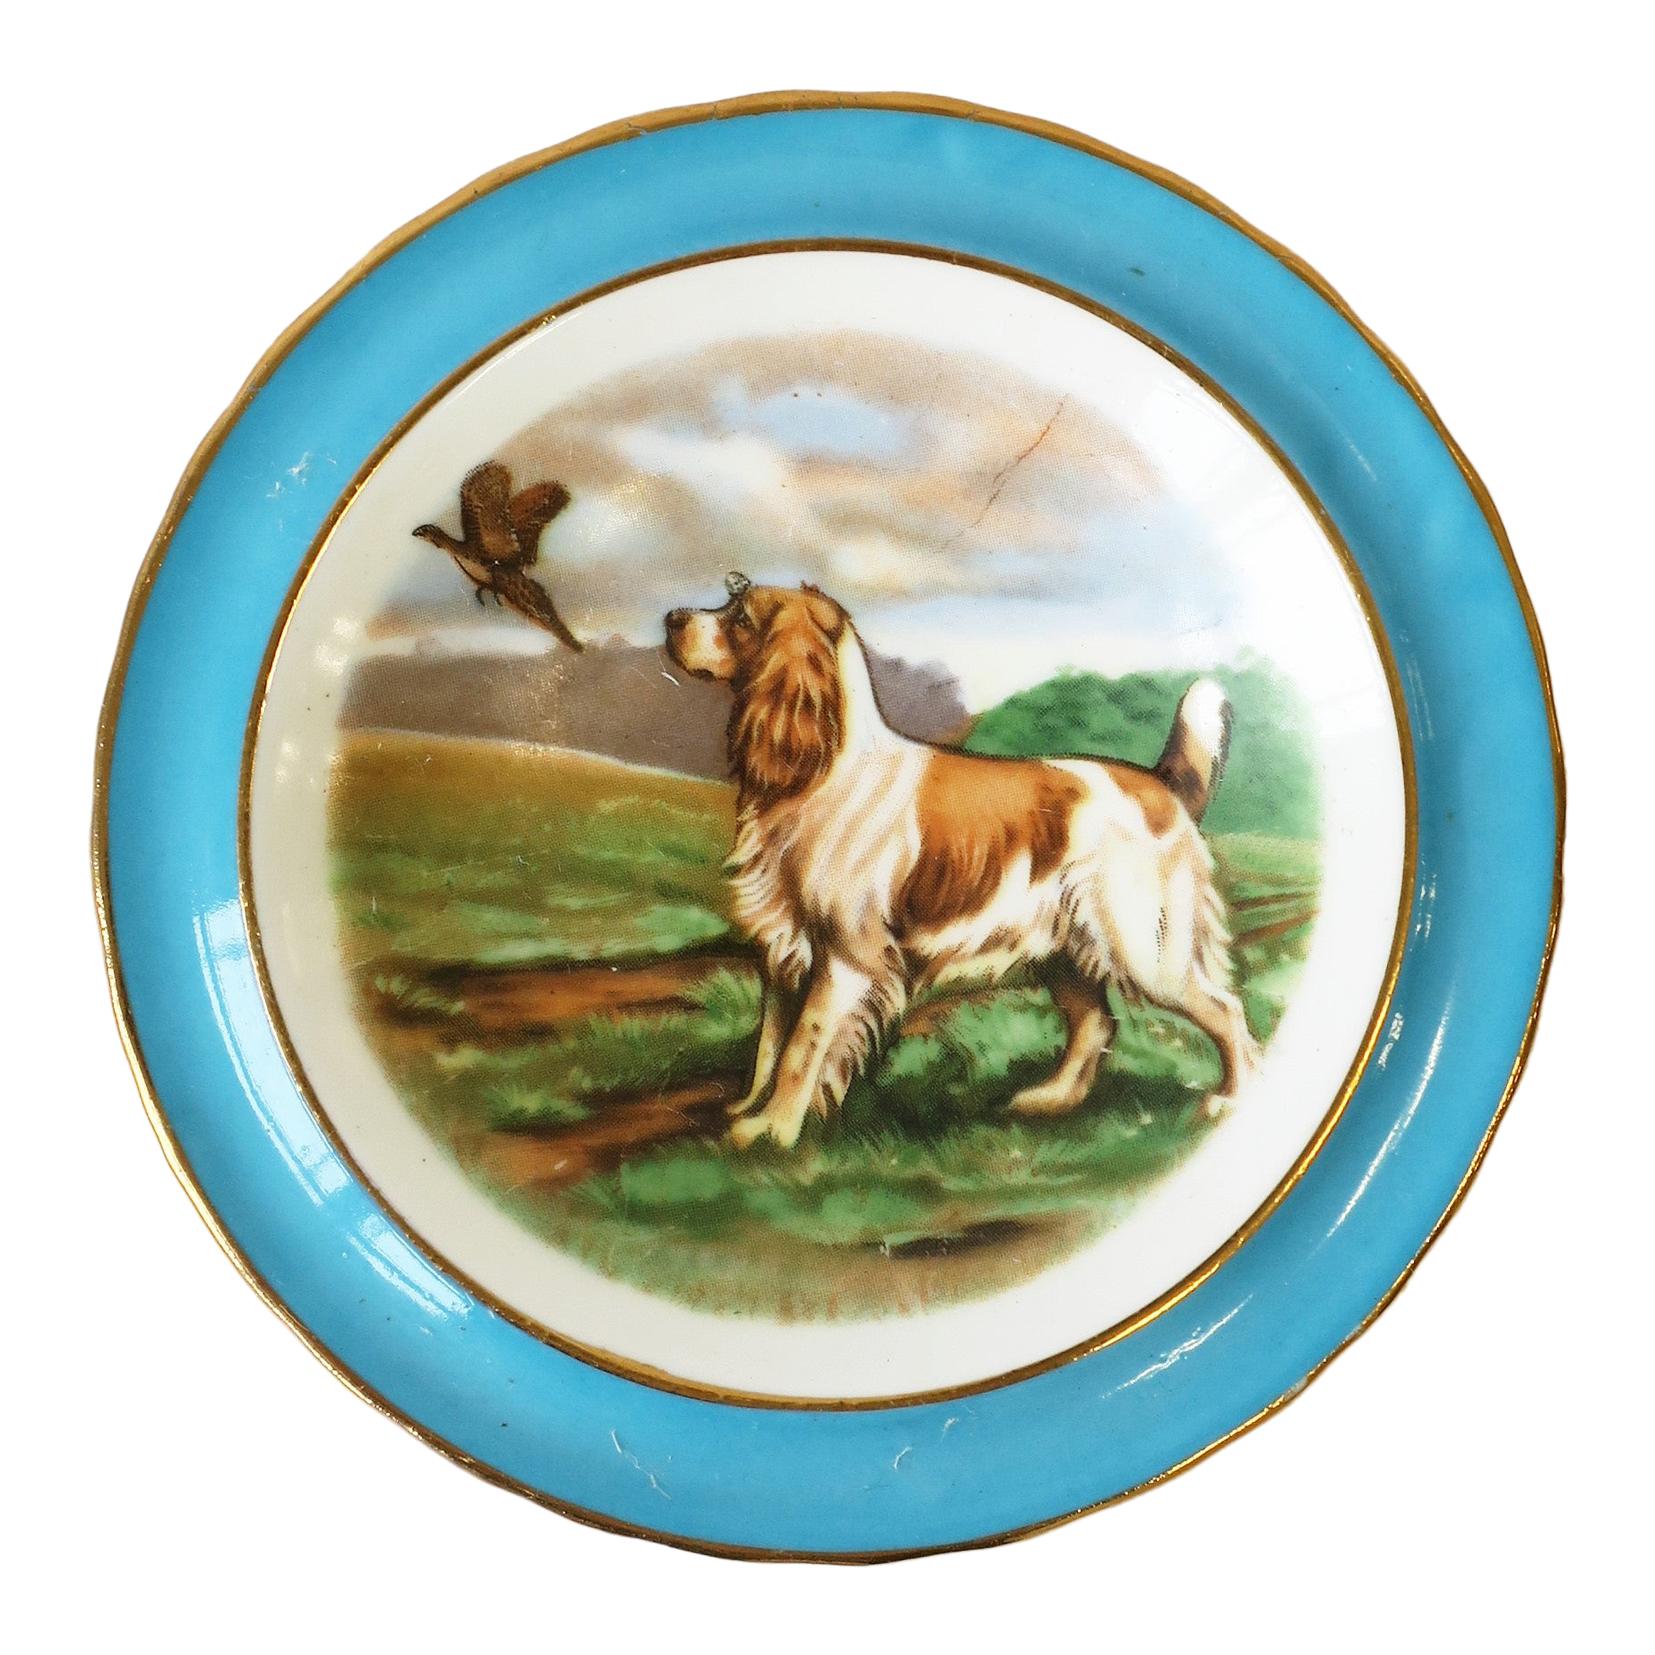 English Blue and White Porcelain Jewelry Dish with Spaniel Dog and Bird